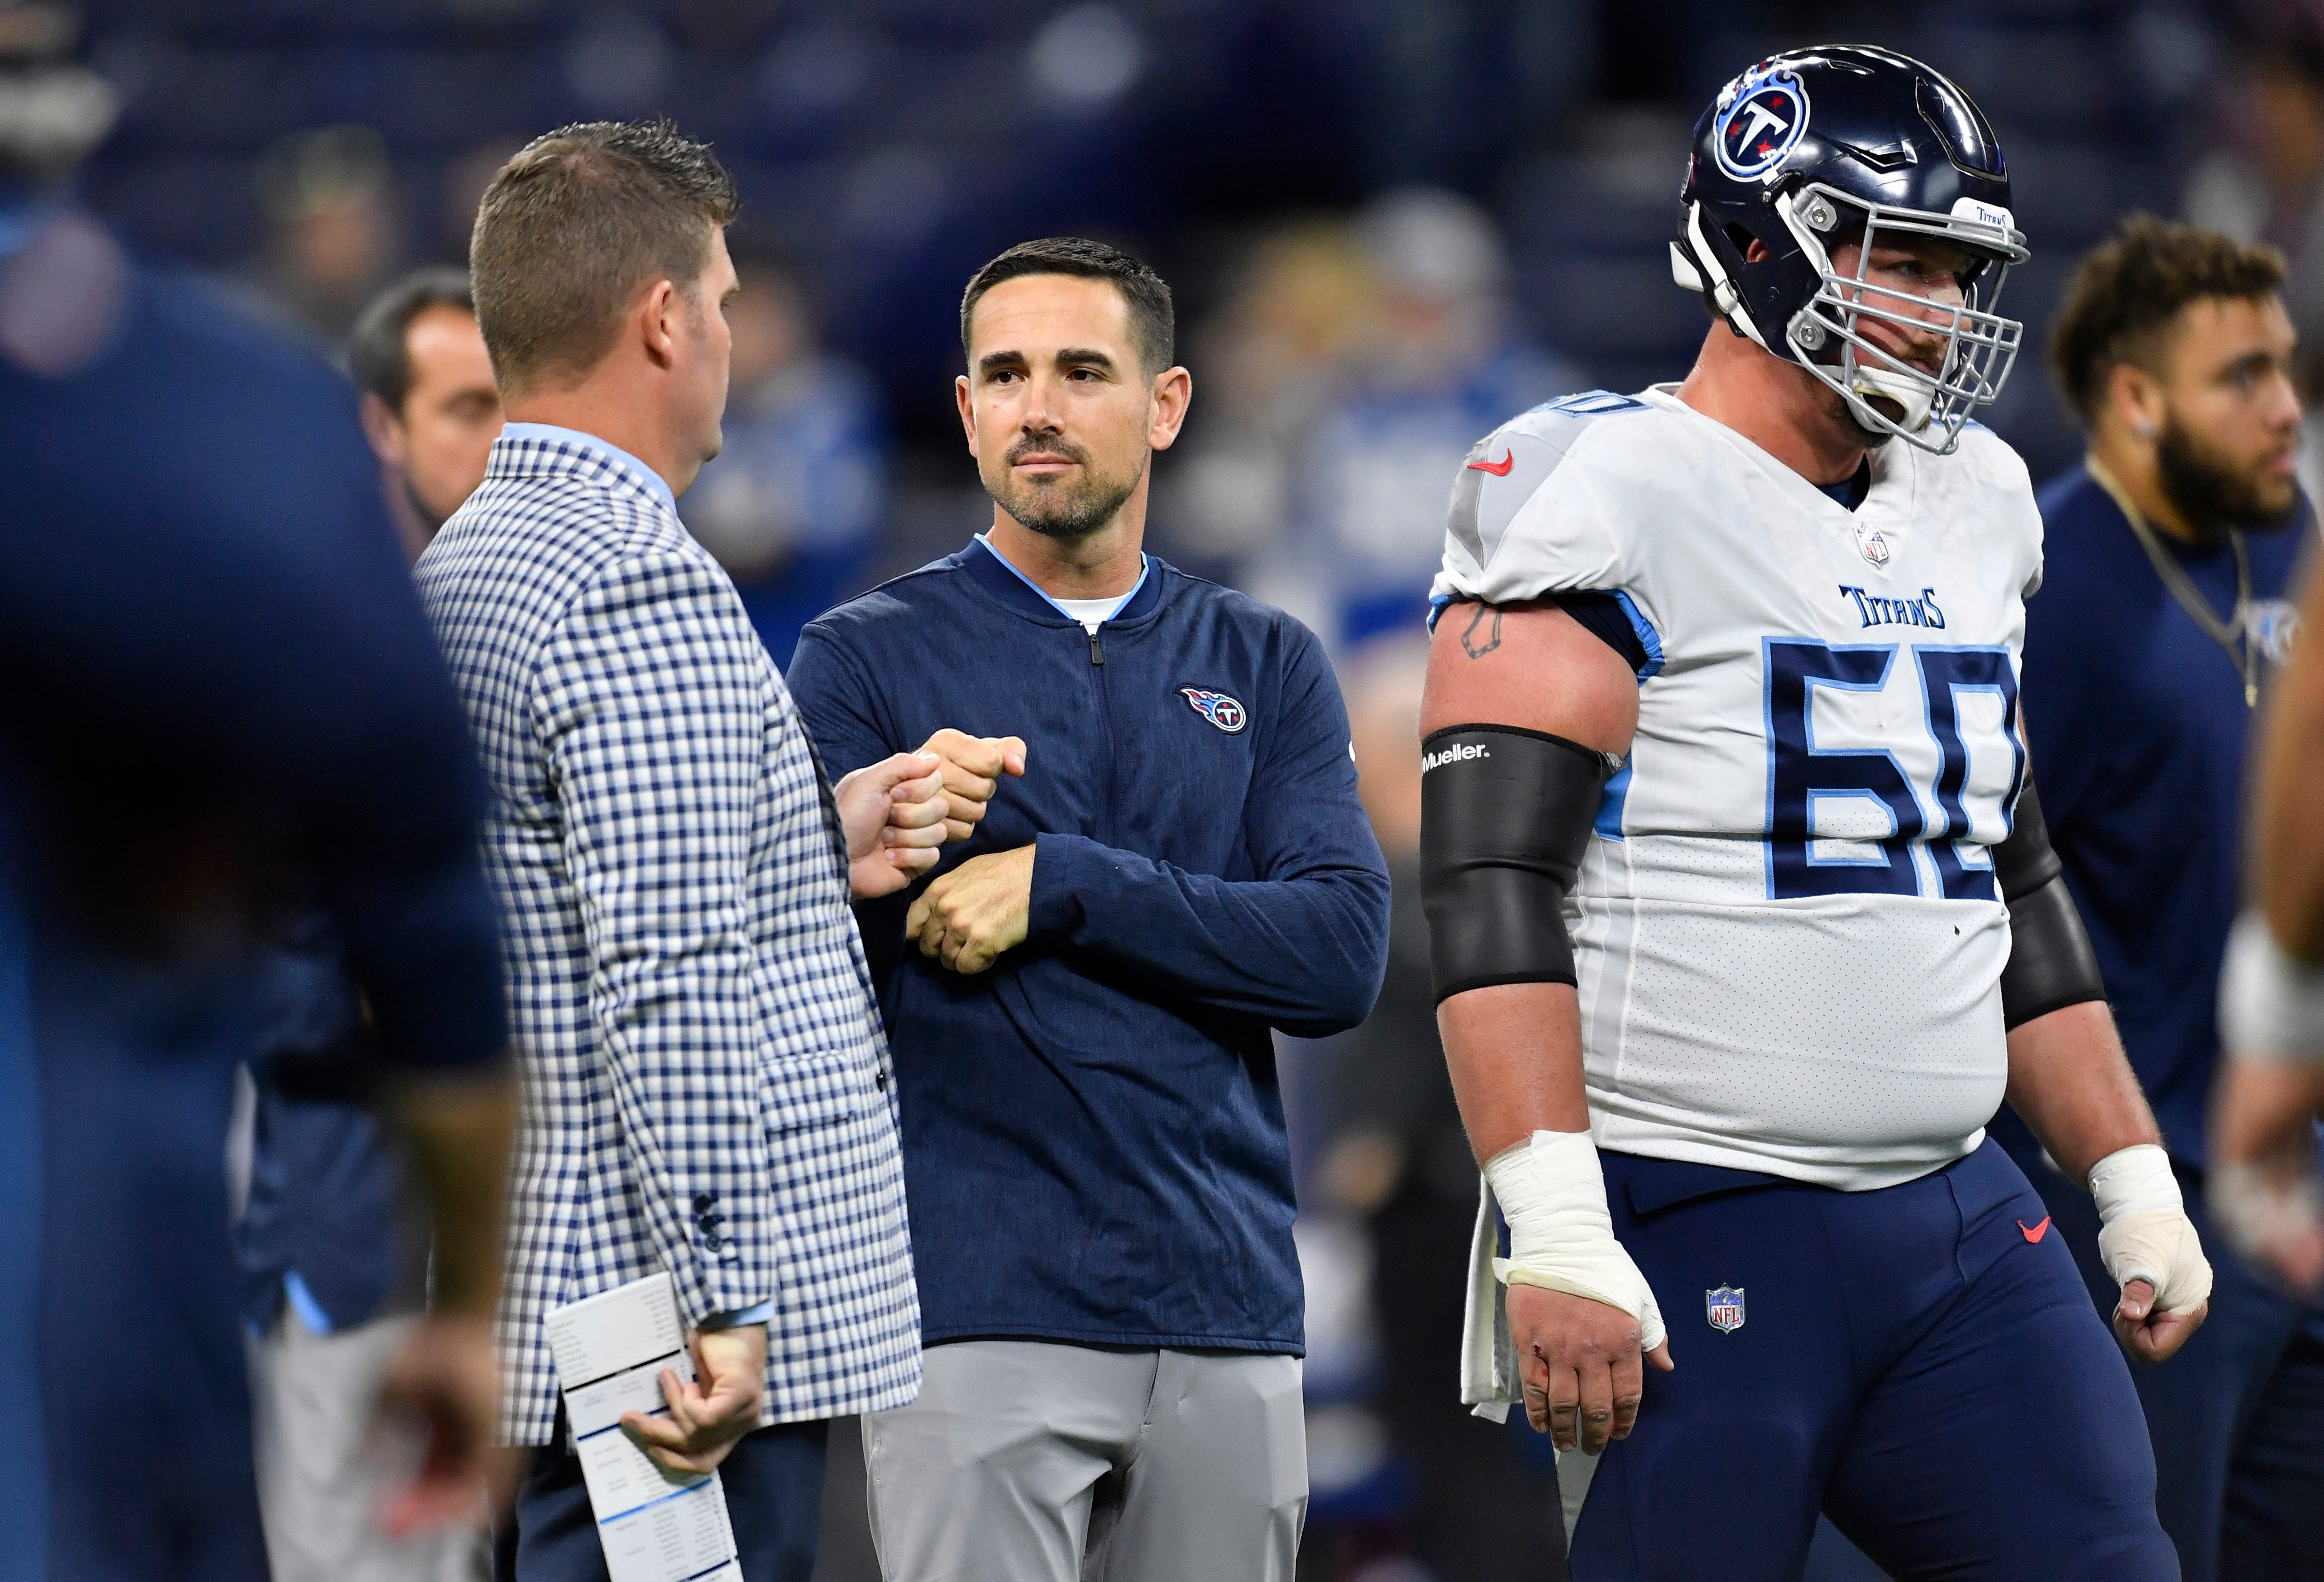 Titans general manager Jon Robinson chats with offensive coordinator Matt Lafleur at Lucas Oil Stadium Sunday, Nov. 18, 2018, in Indianapolis, Ind.